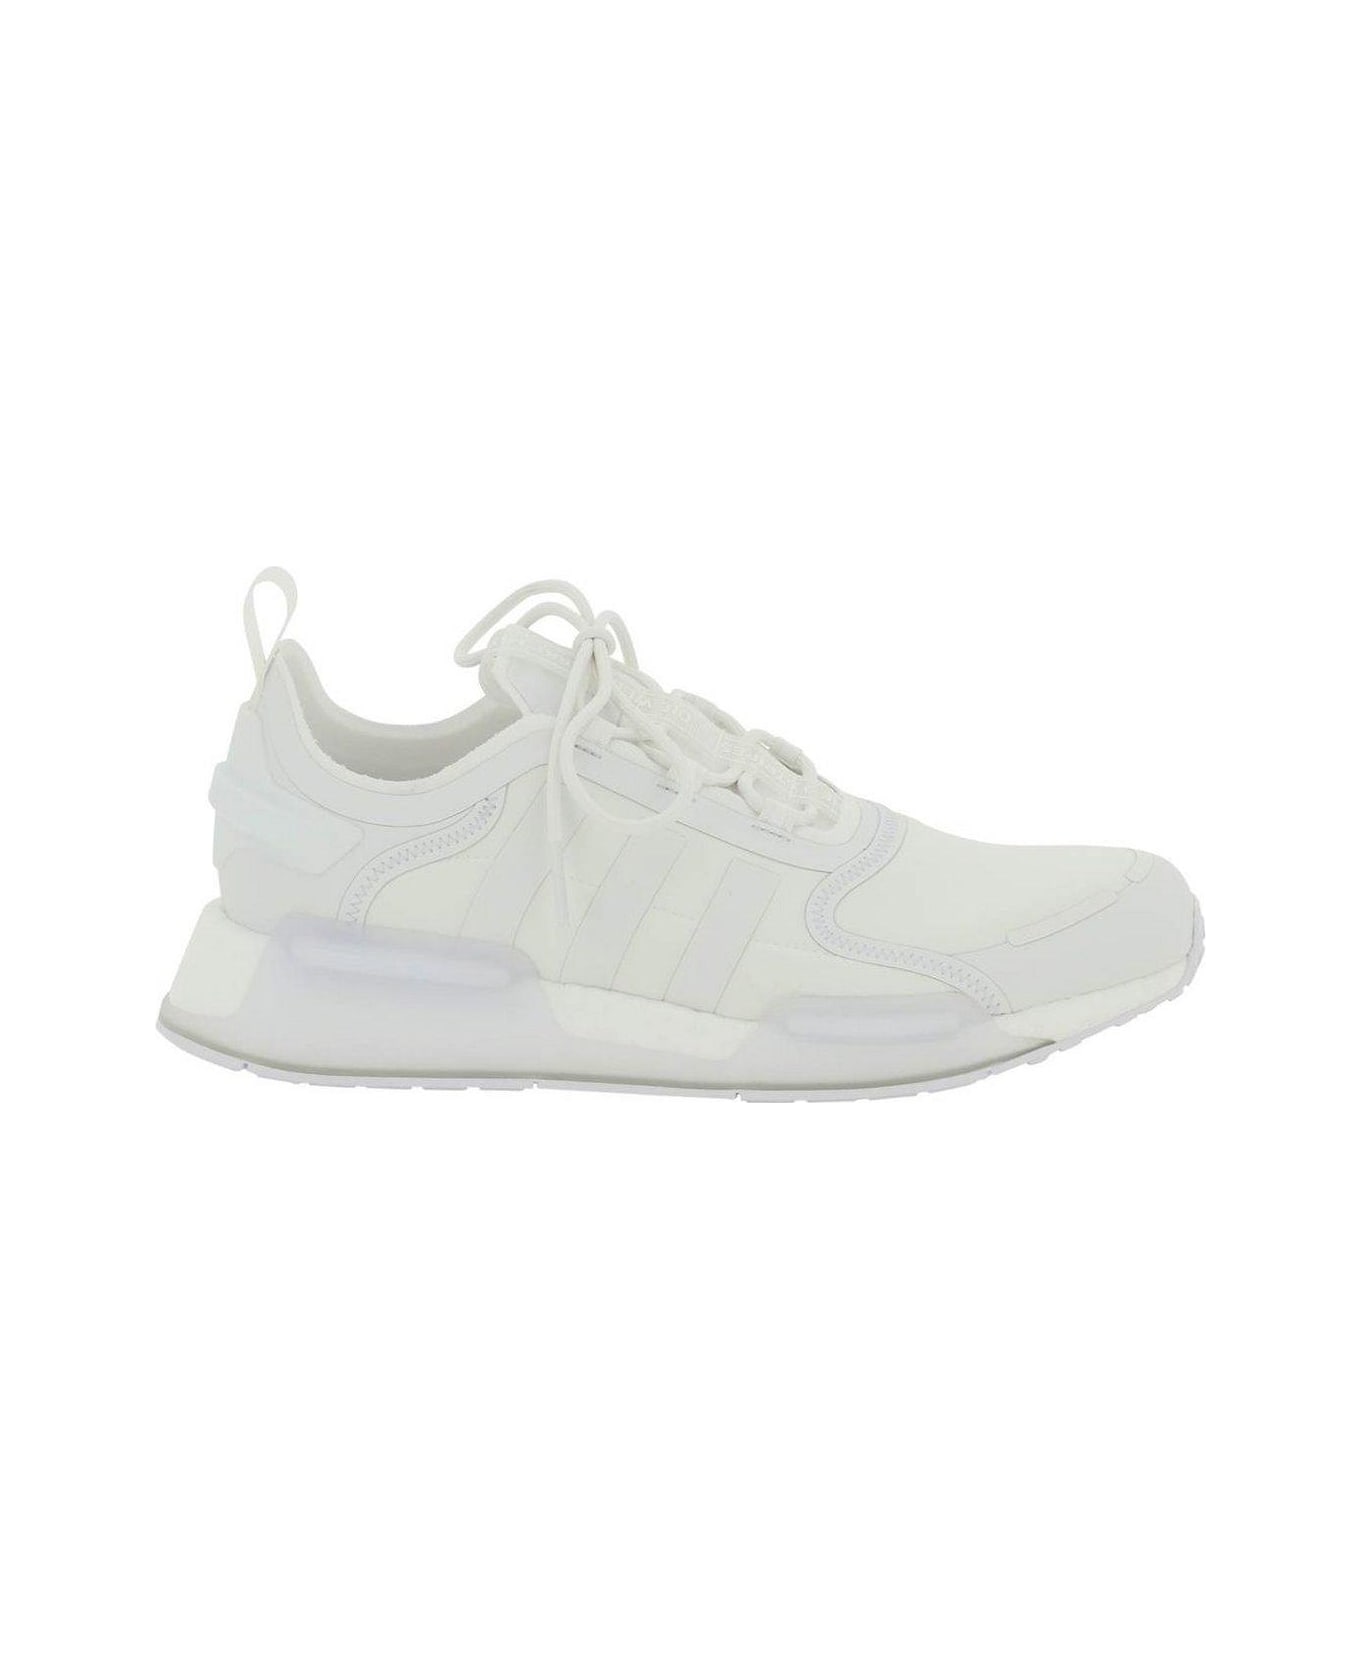 Adidas Nmd V-3 Lace-up Sneakers - Ftwwht/ftwwht/ftwwht